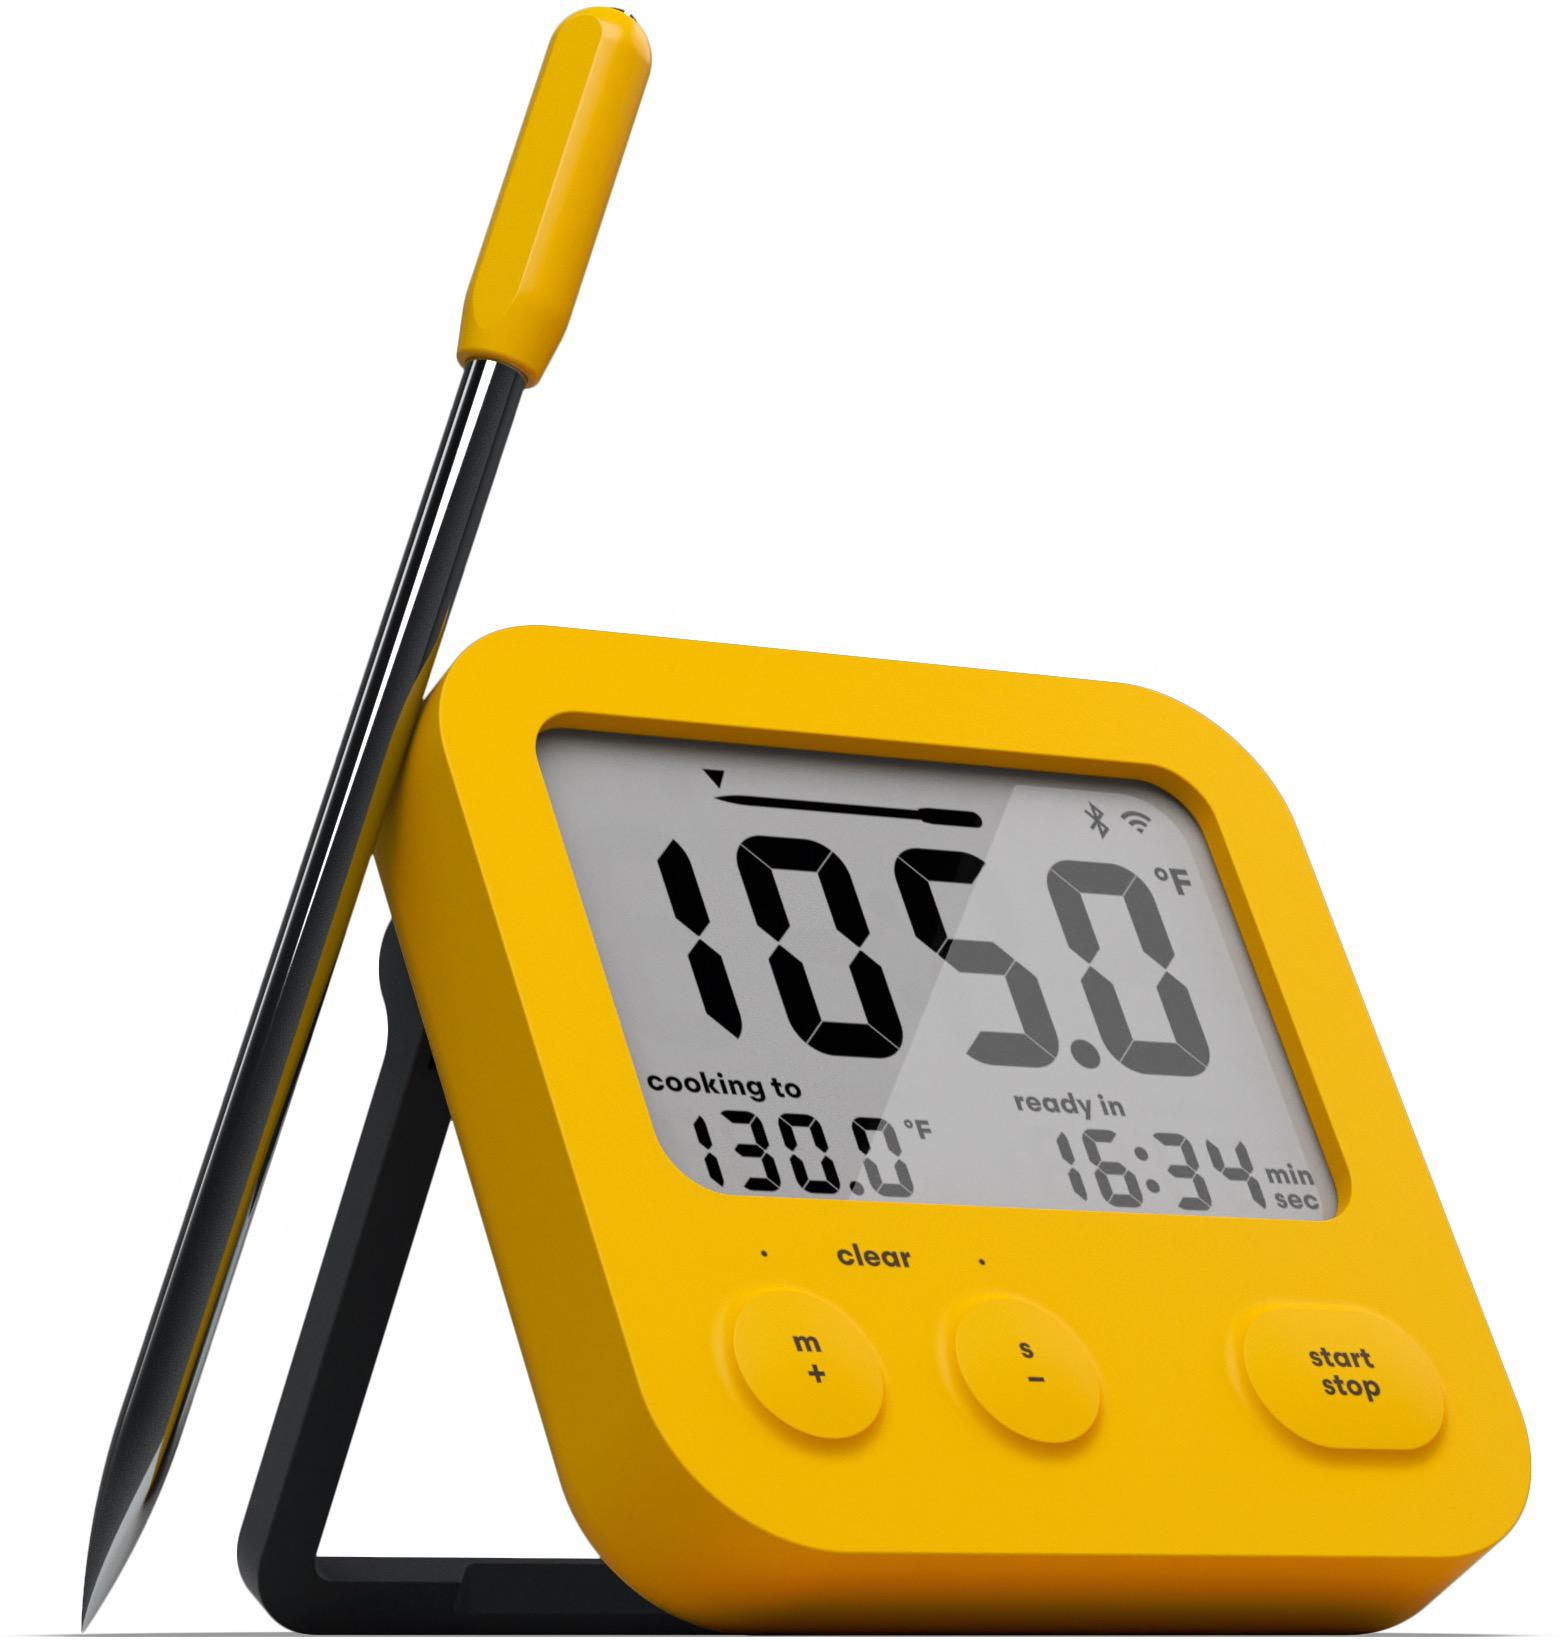 Combustion Inc Wireless thermometer probe by Chris Young - Page 4 - Kitchen  Consumer - eGullet Forums